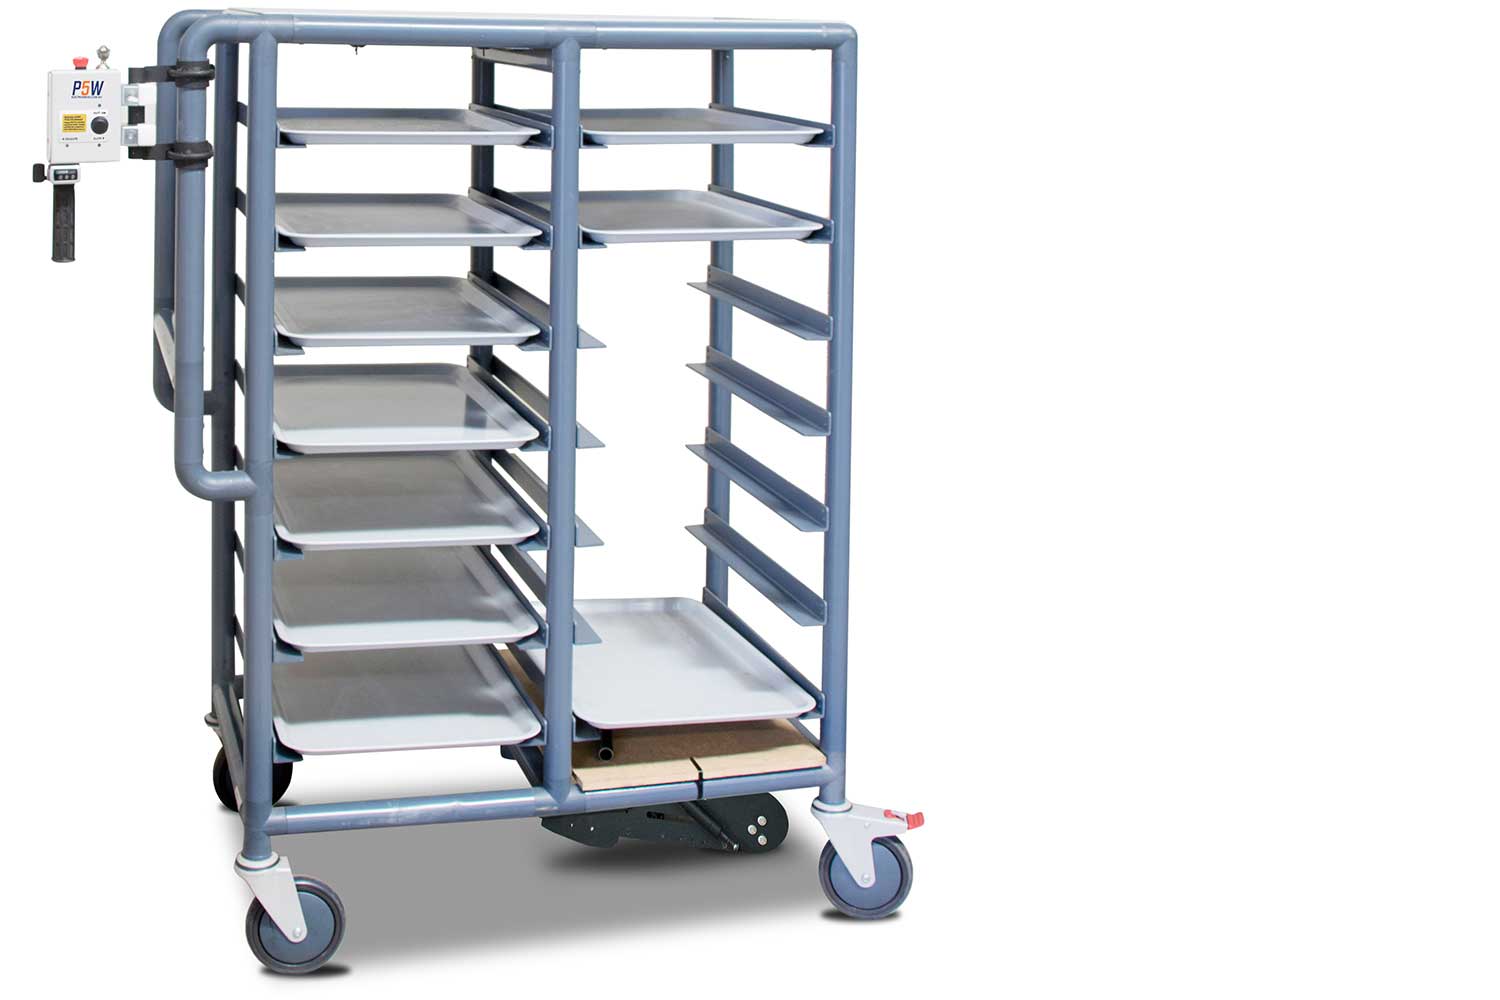 Electrodrive's Powered Fifth Wheel retrofitted to a meal delivery trolley 